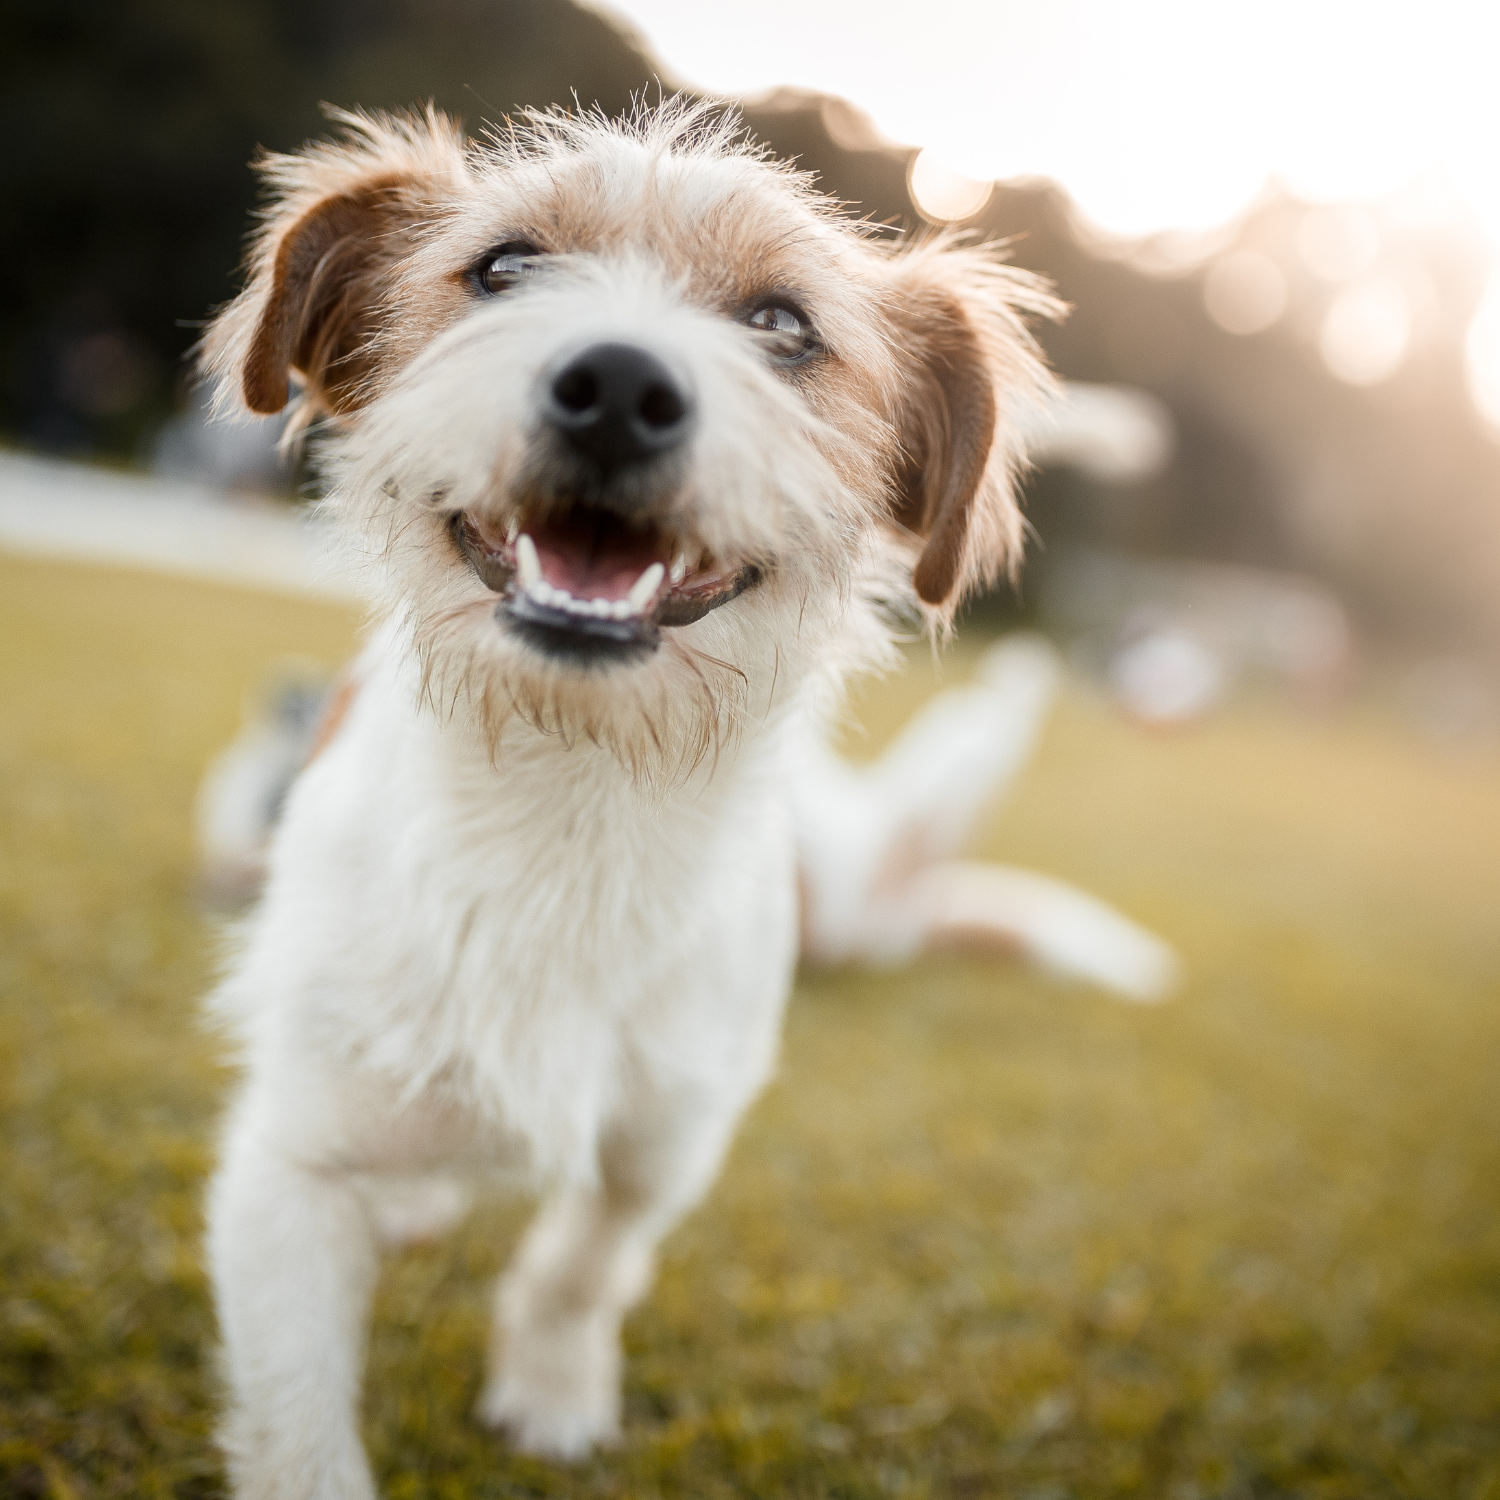 Allowing Pets at Your Rental Property: Why It's a Good Choice